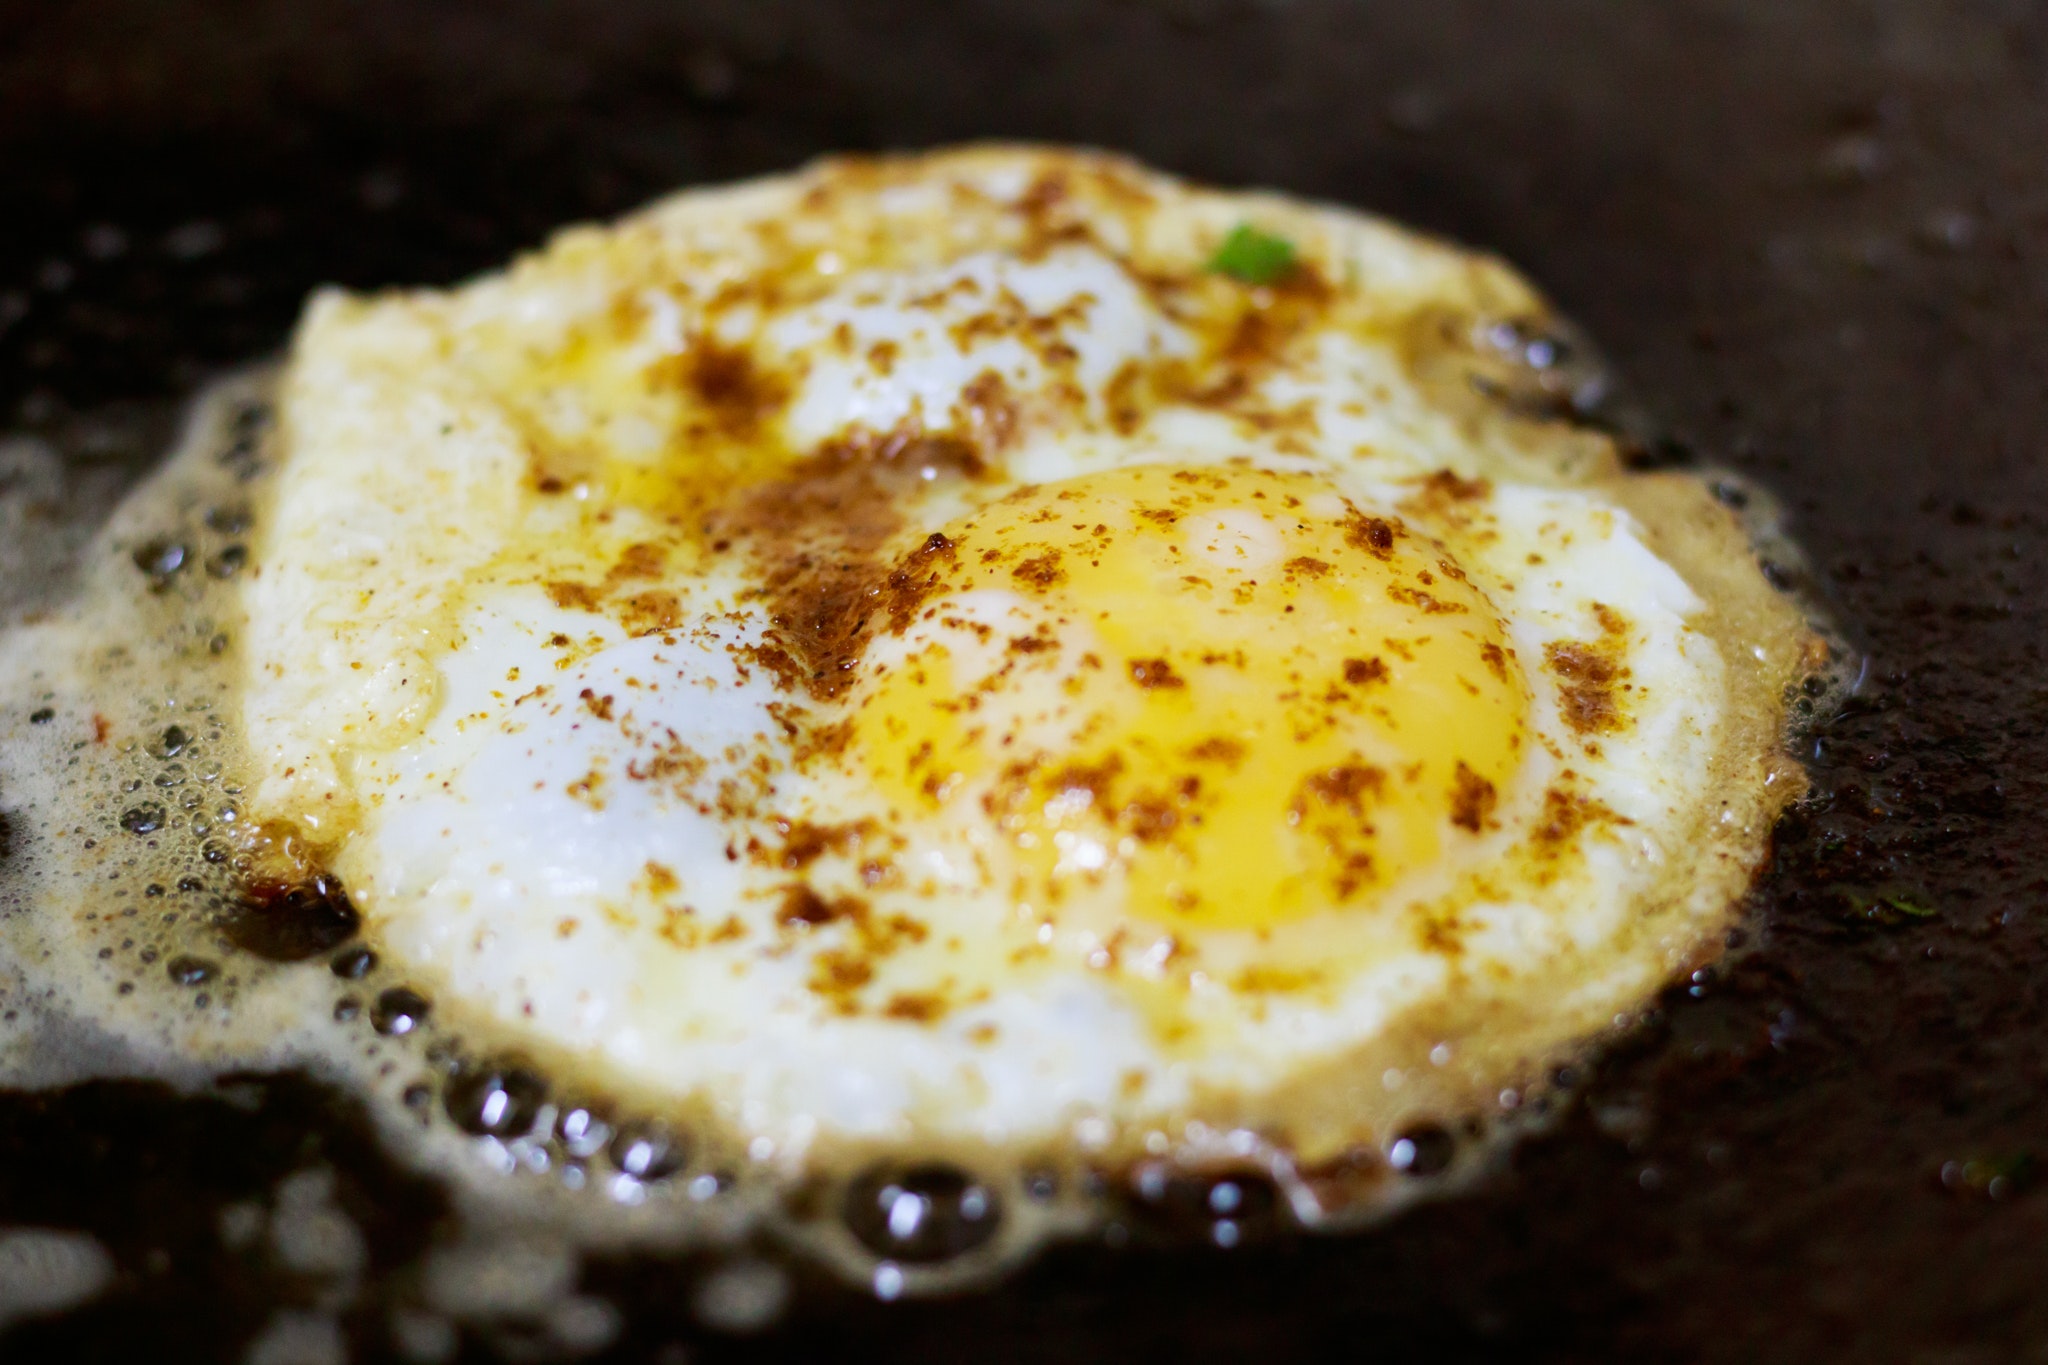 Best Fried Eggs in a Stainless Steel Pan